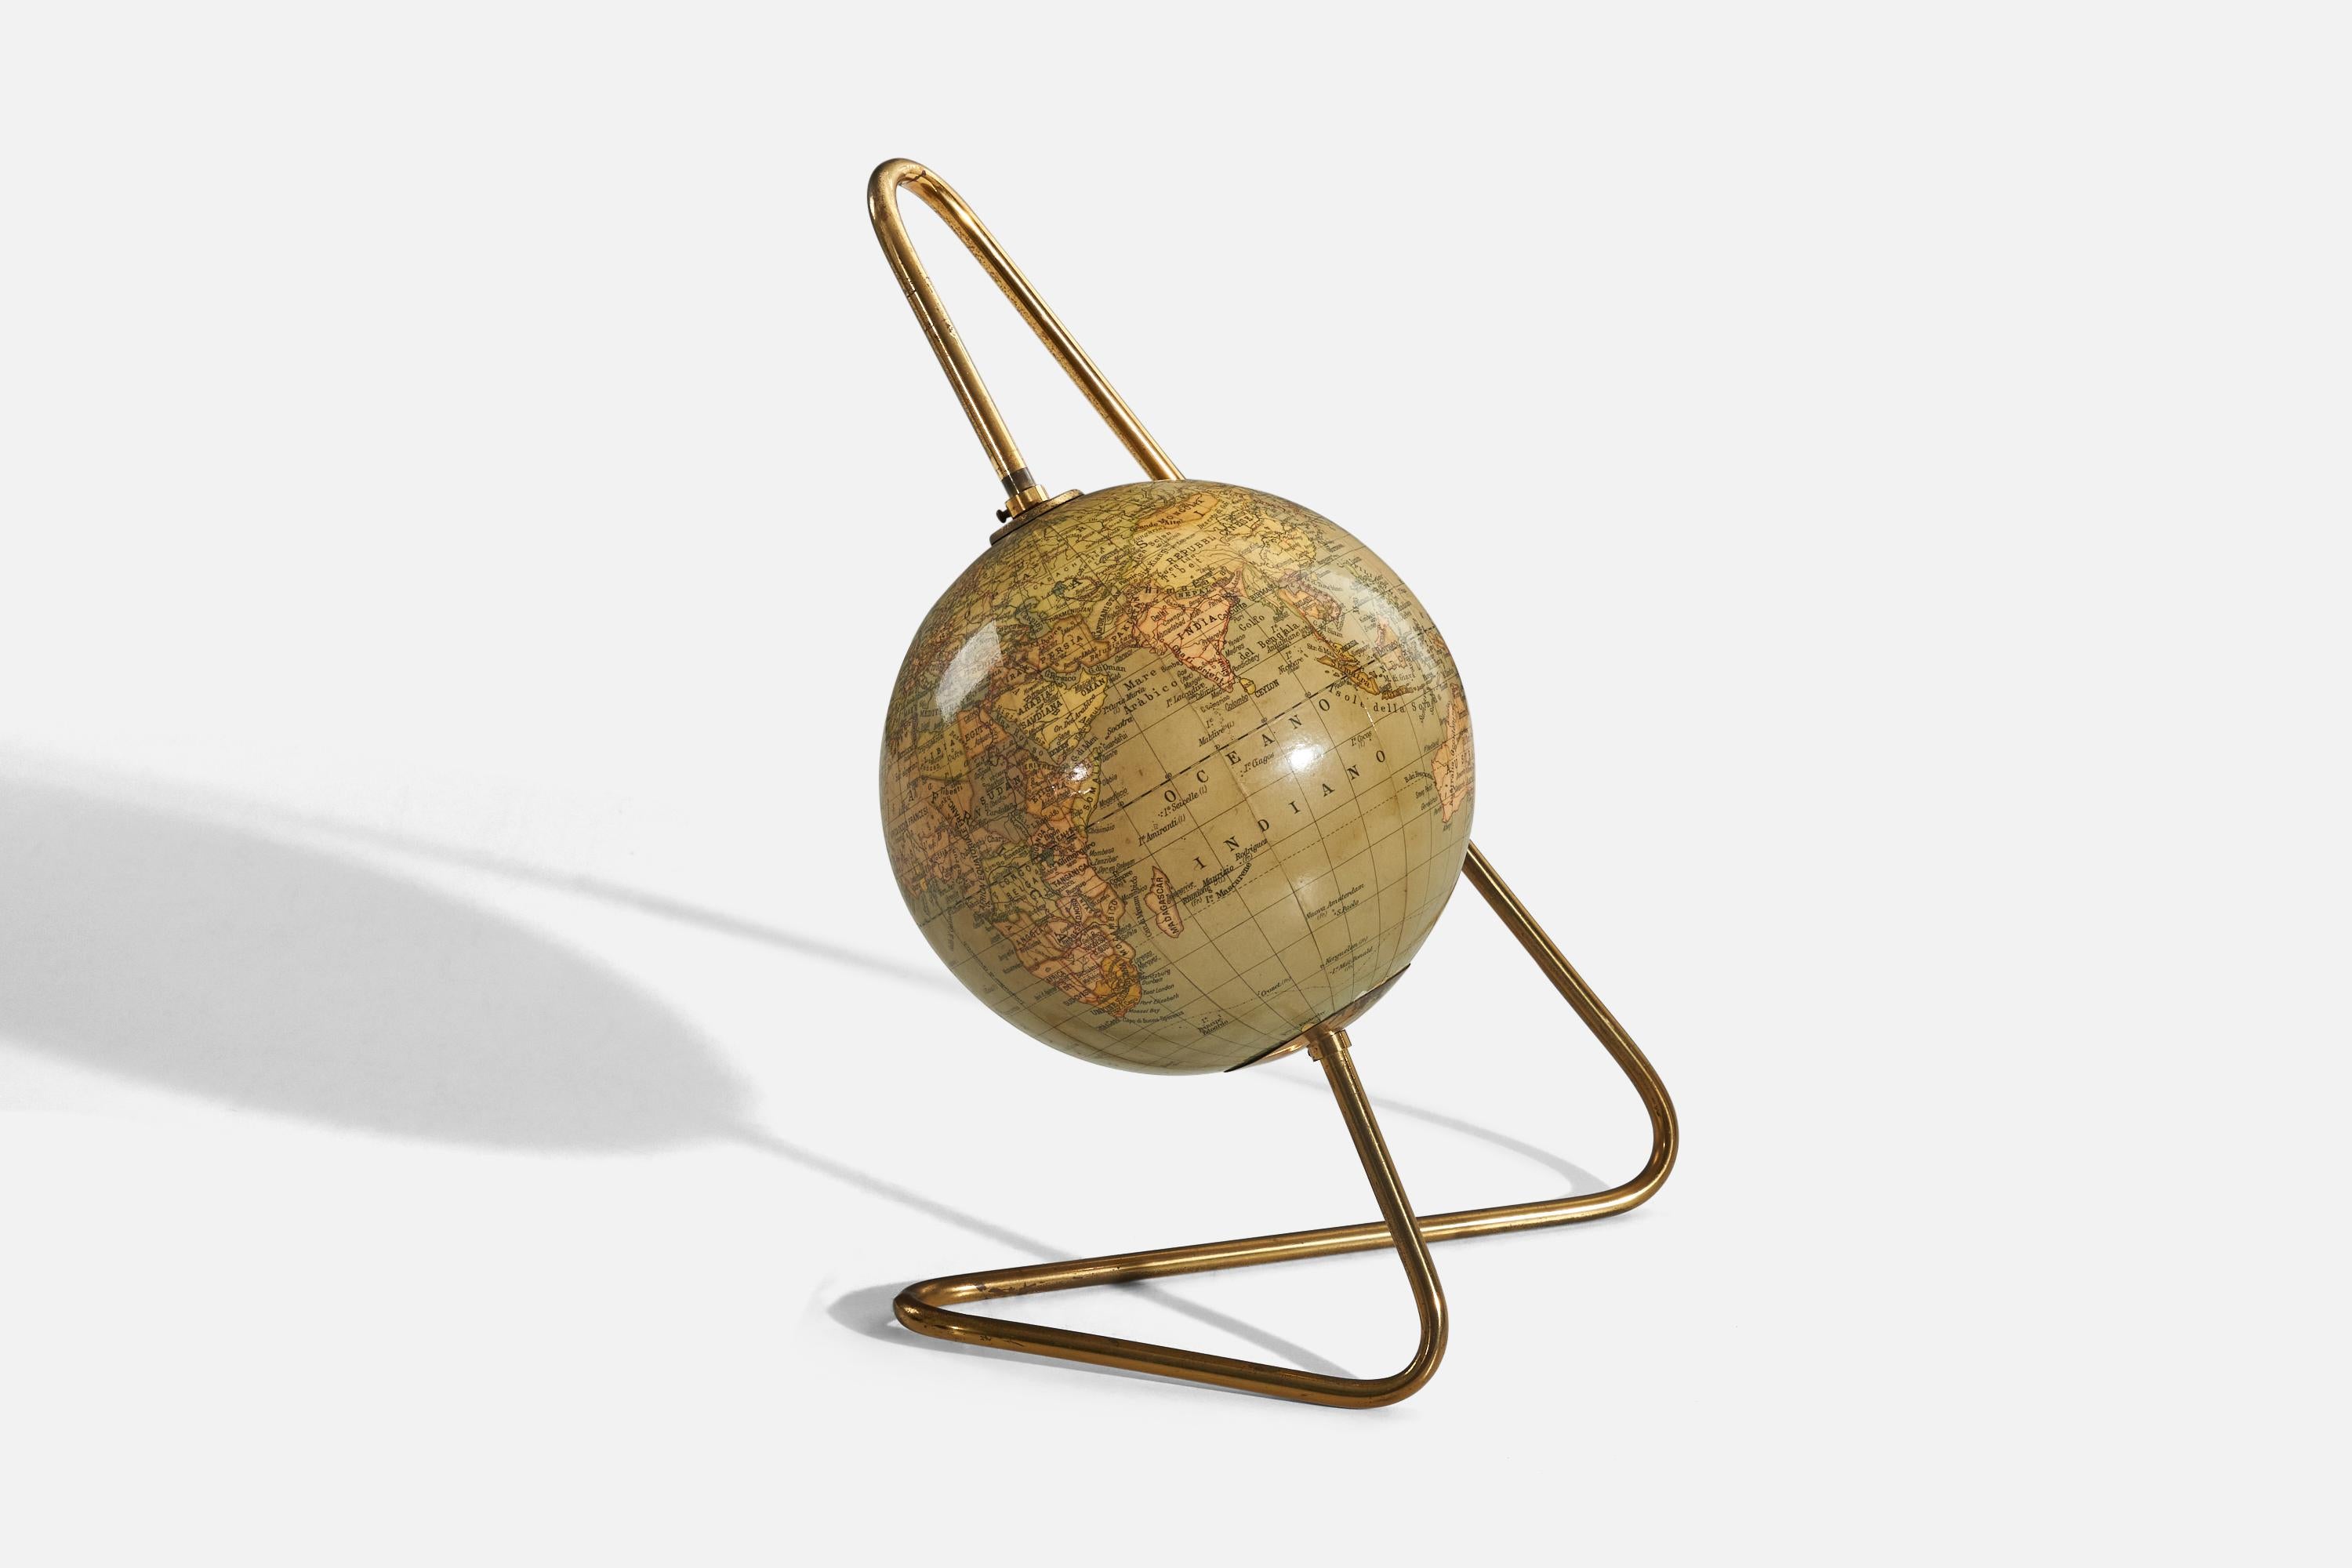 A brass and fiberglass table lamp, designed and produced by an Italian designer, Italy, 1950s.

